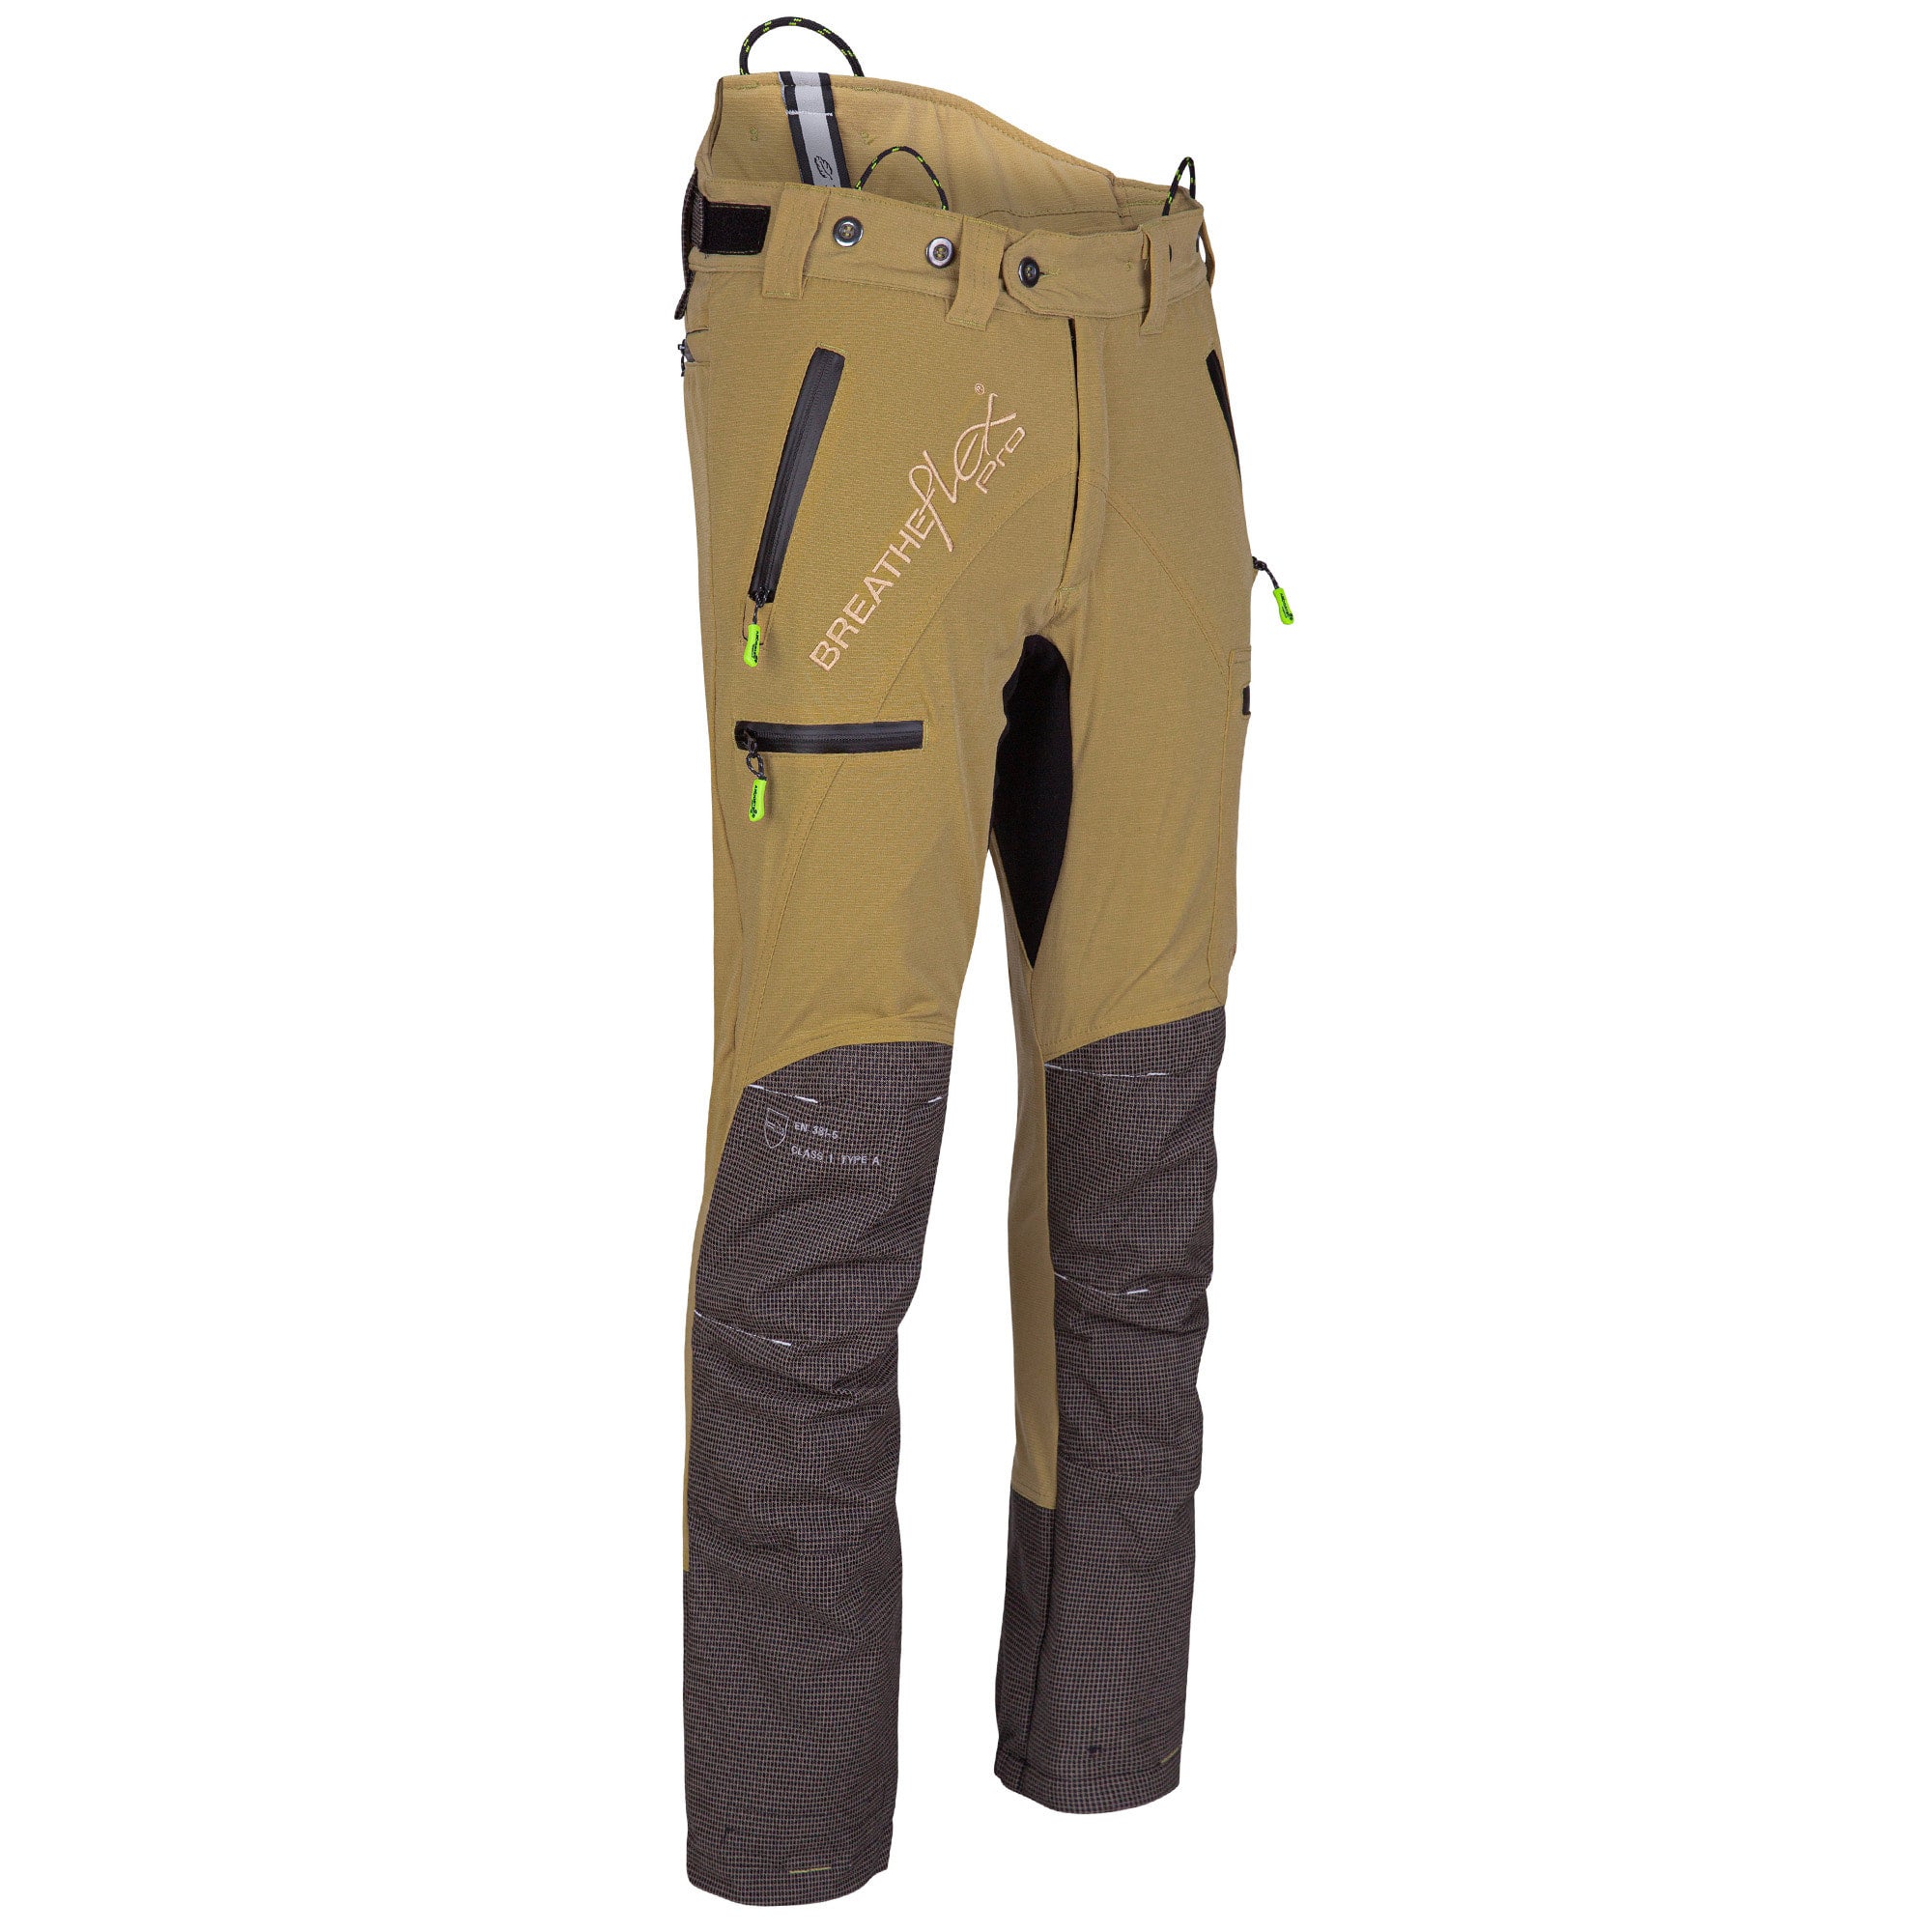 Best chainsaw trousers UK Type A and Type C chainsaw trousers compared  by classes  Shetlands Garden Tool Box